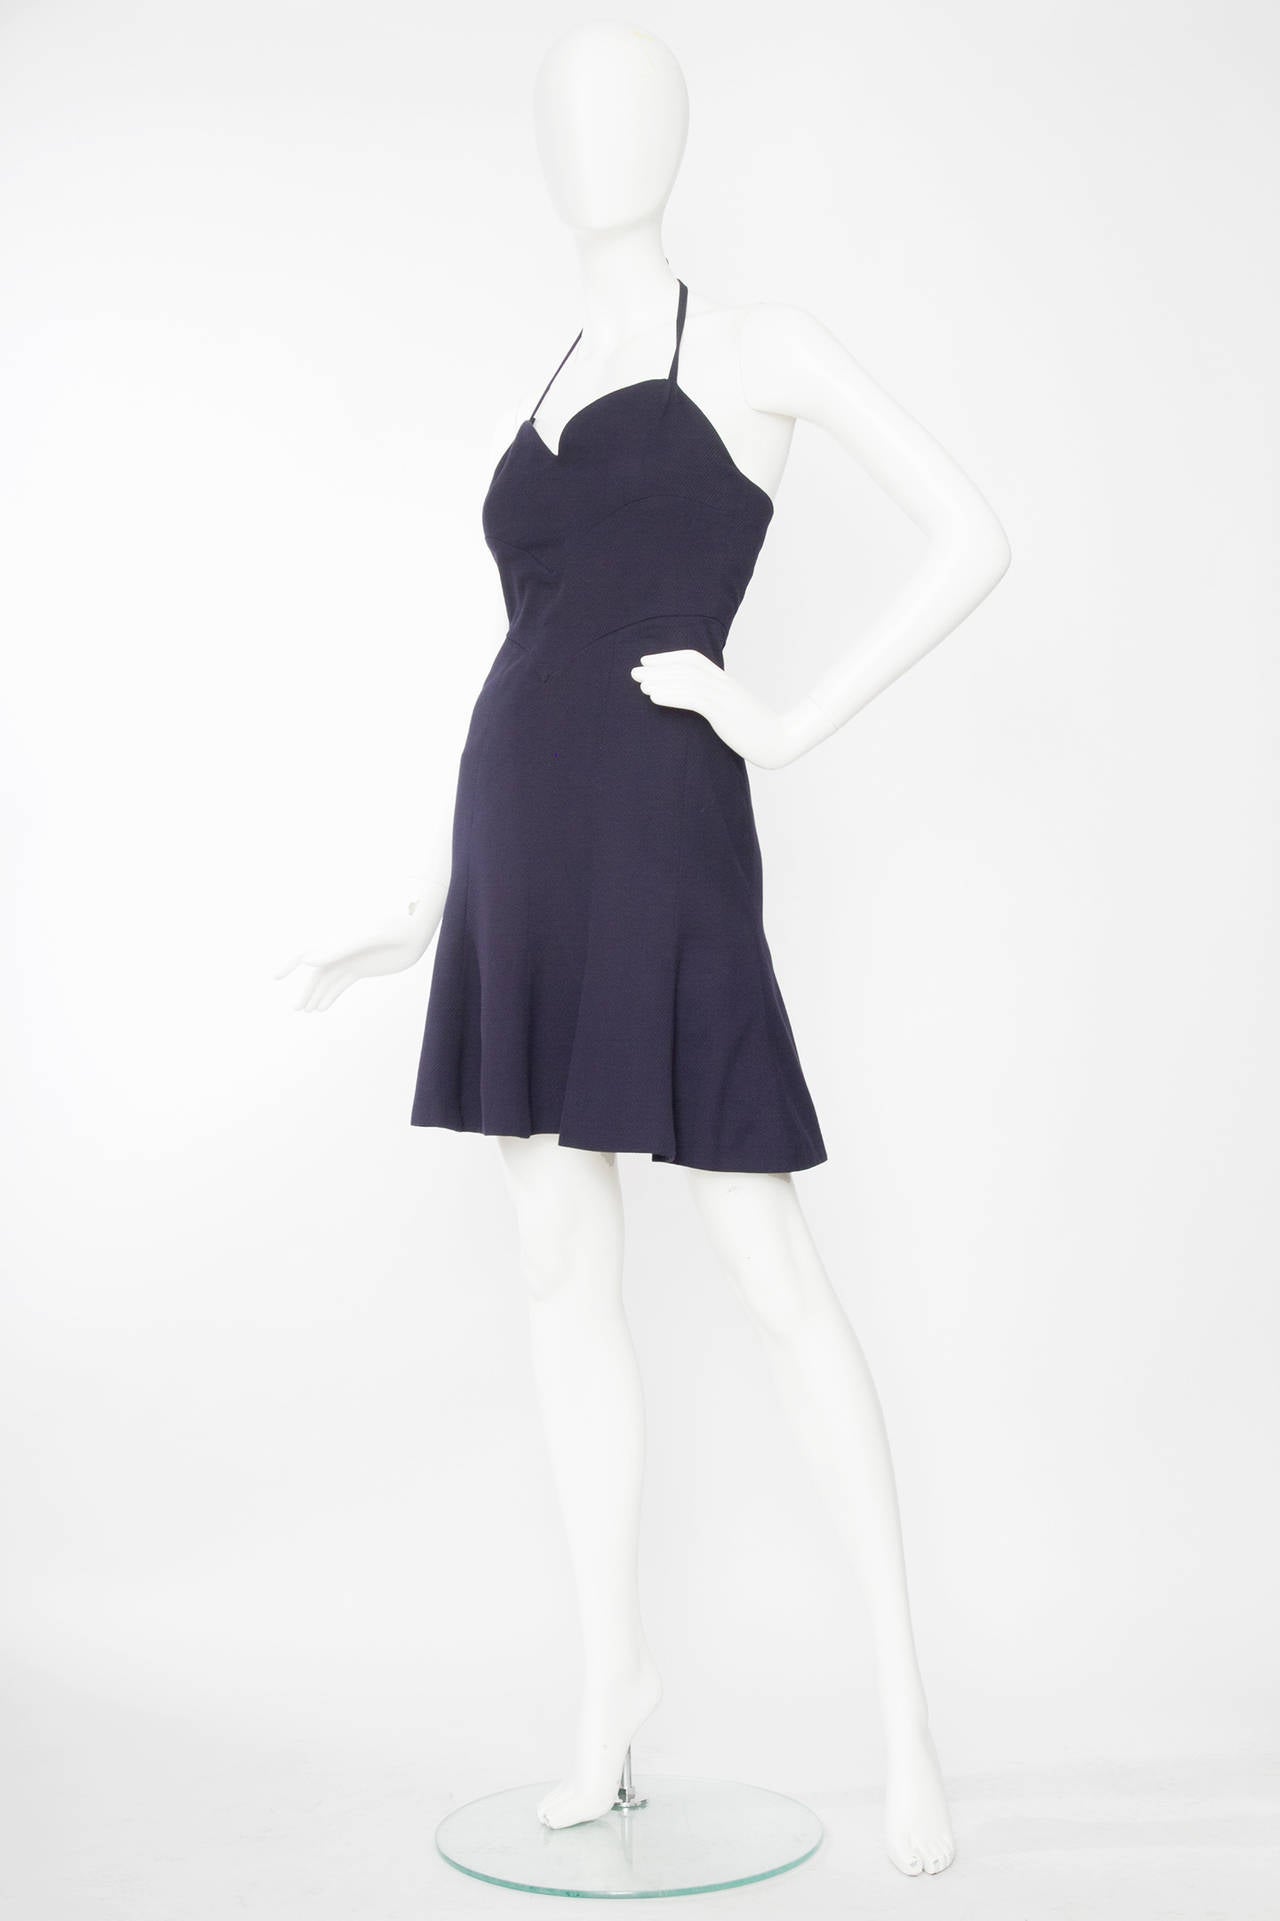 A flirty 1990s Chanel Boutique navy blue cotton dress with an adjustable strap halter-neck, The dress has a low cut front and a ruffle hemline. The dress closes in the back with a zipper closure. 

The size of the dress corresponds to a modern size